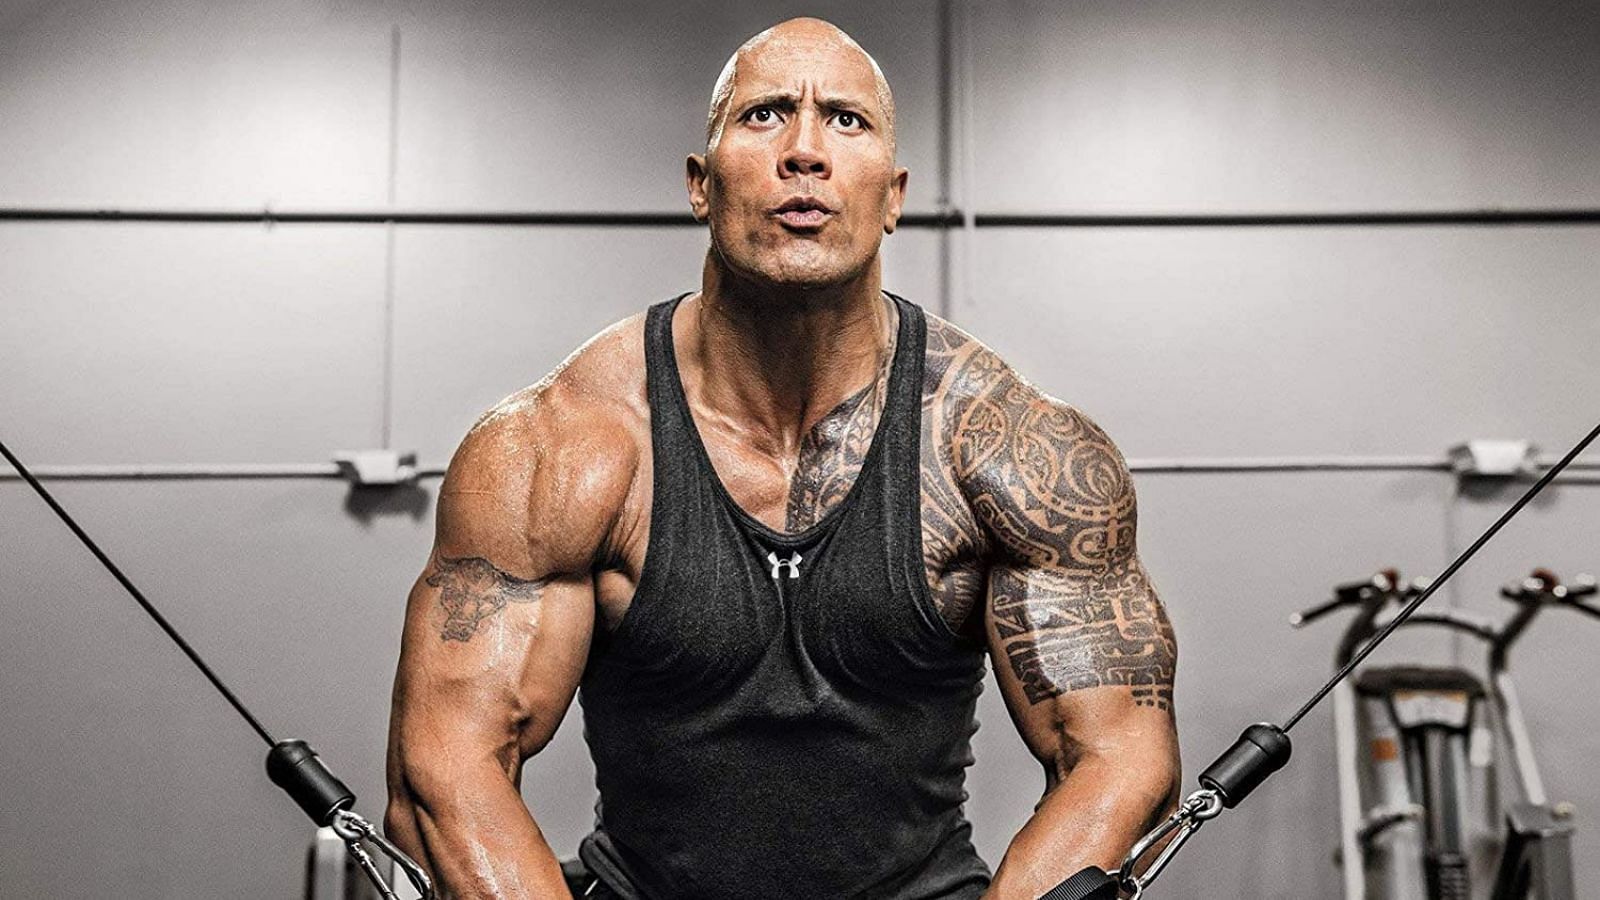 The Rock is a former World Champion and a Hollywood Icon